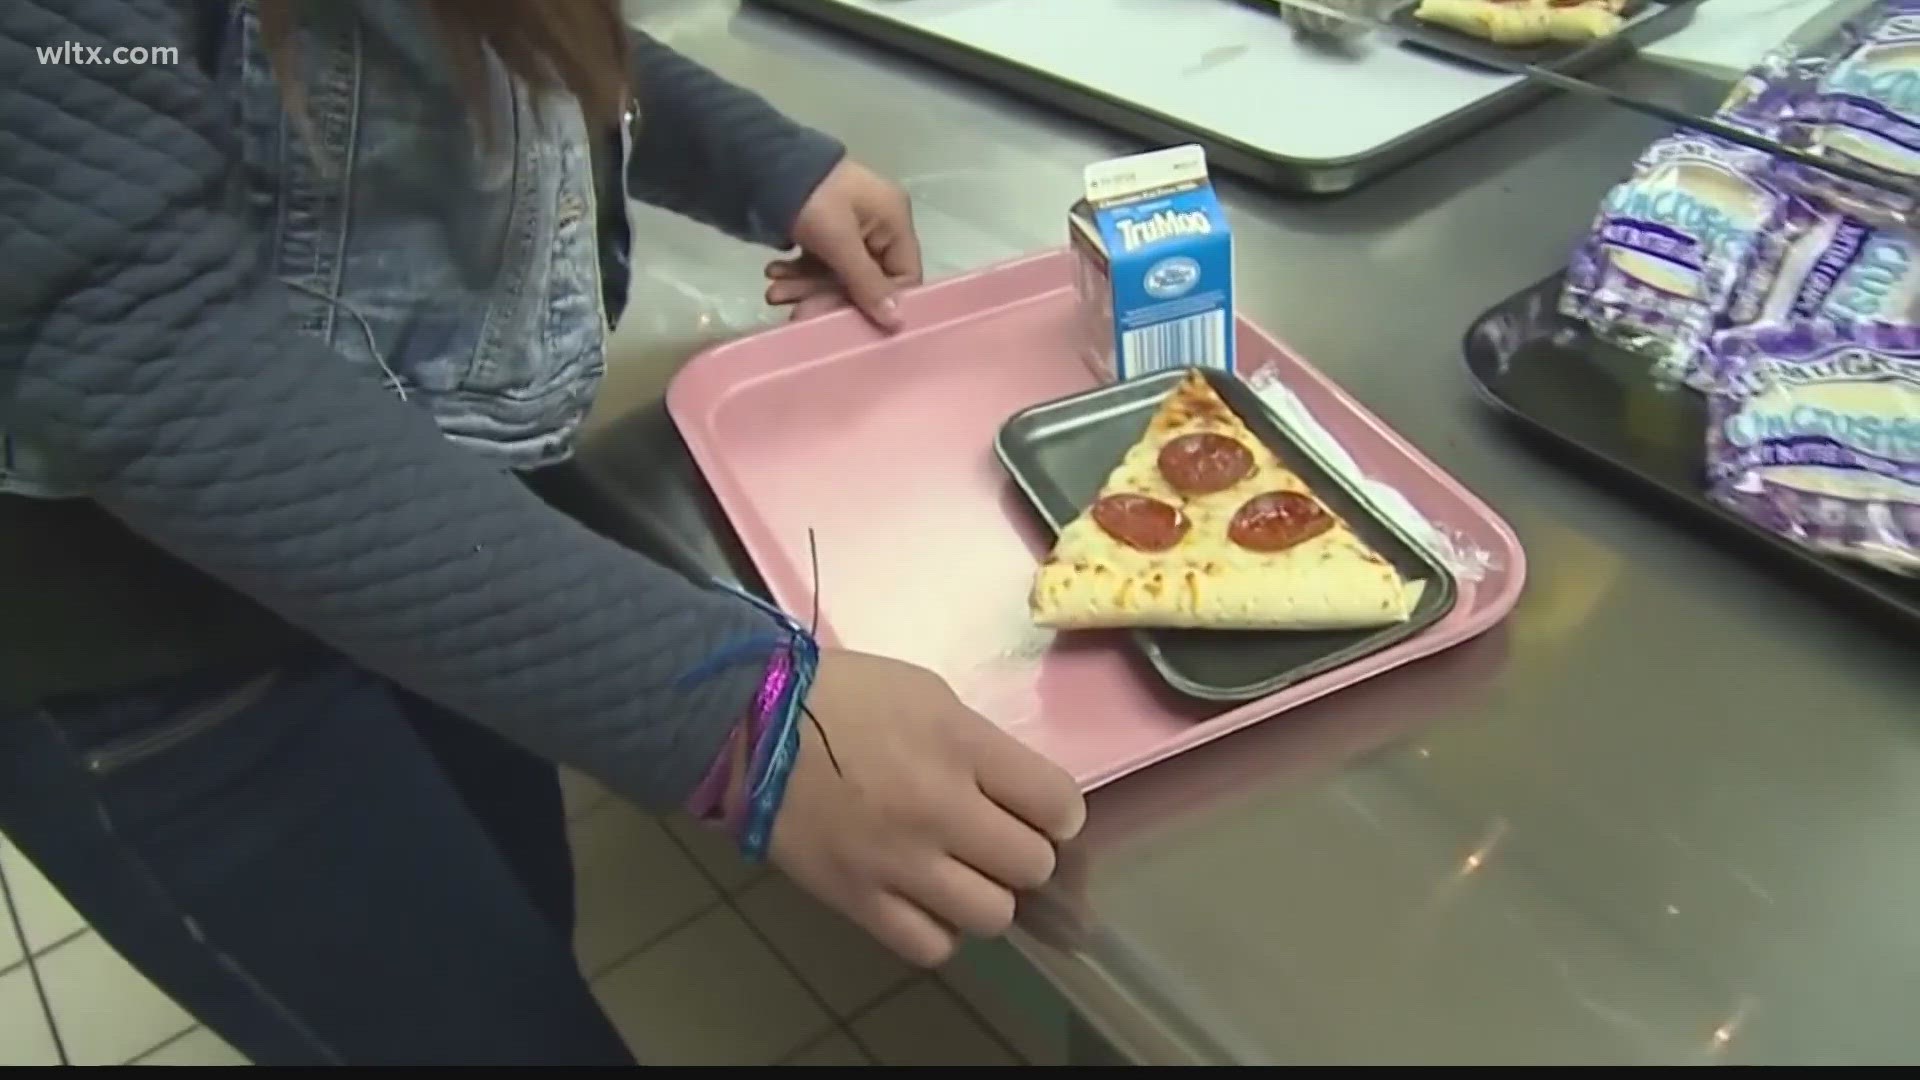 Here's how children in the Midlands can access free lunches.